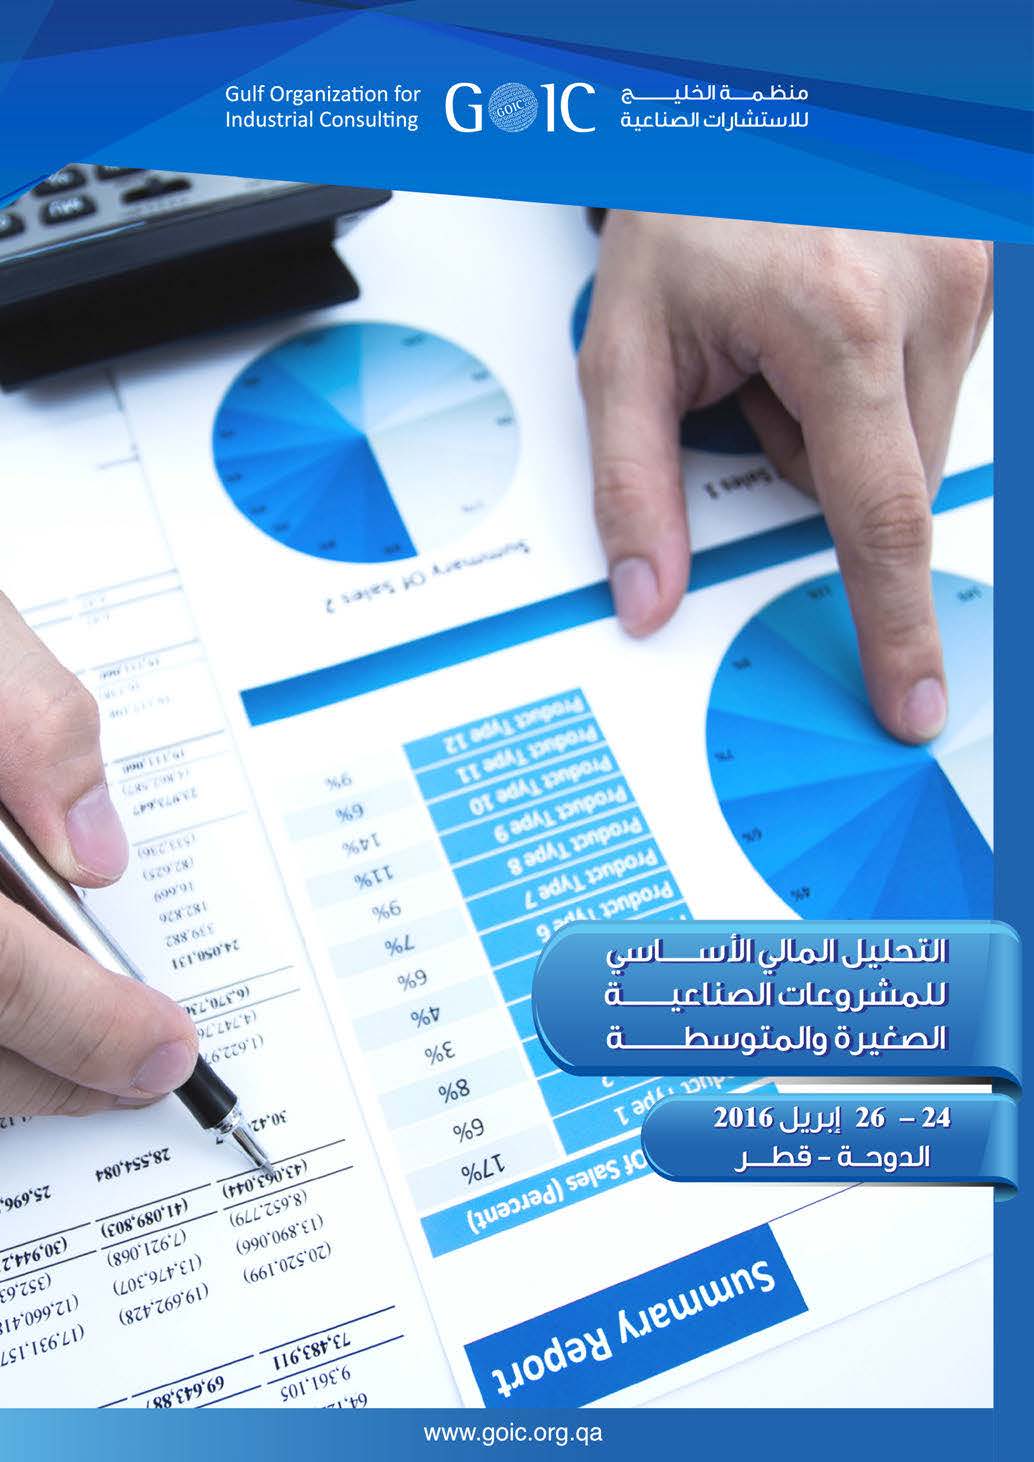 GOIC holds a basic financial analysis workshop for SMEs in April 2016